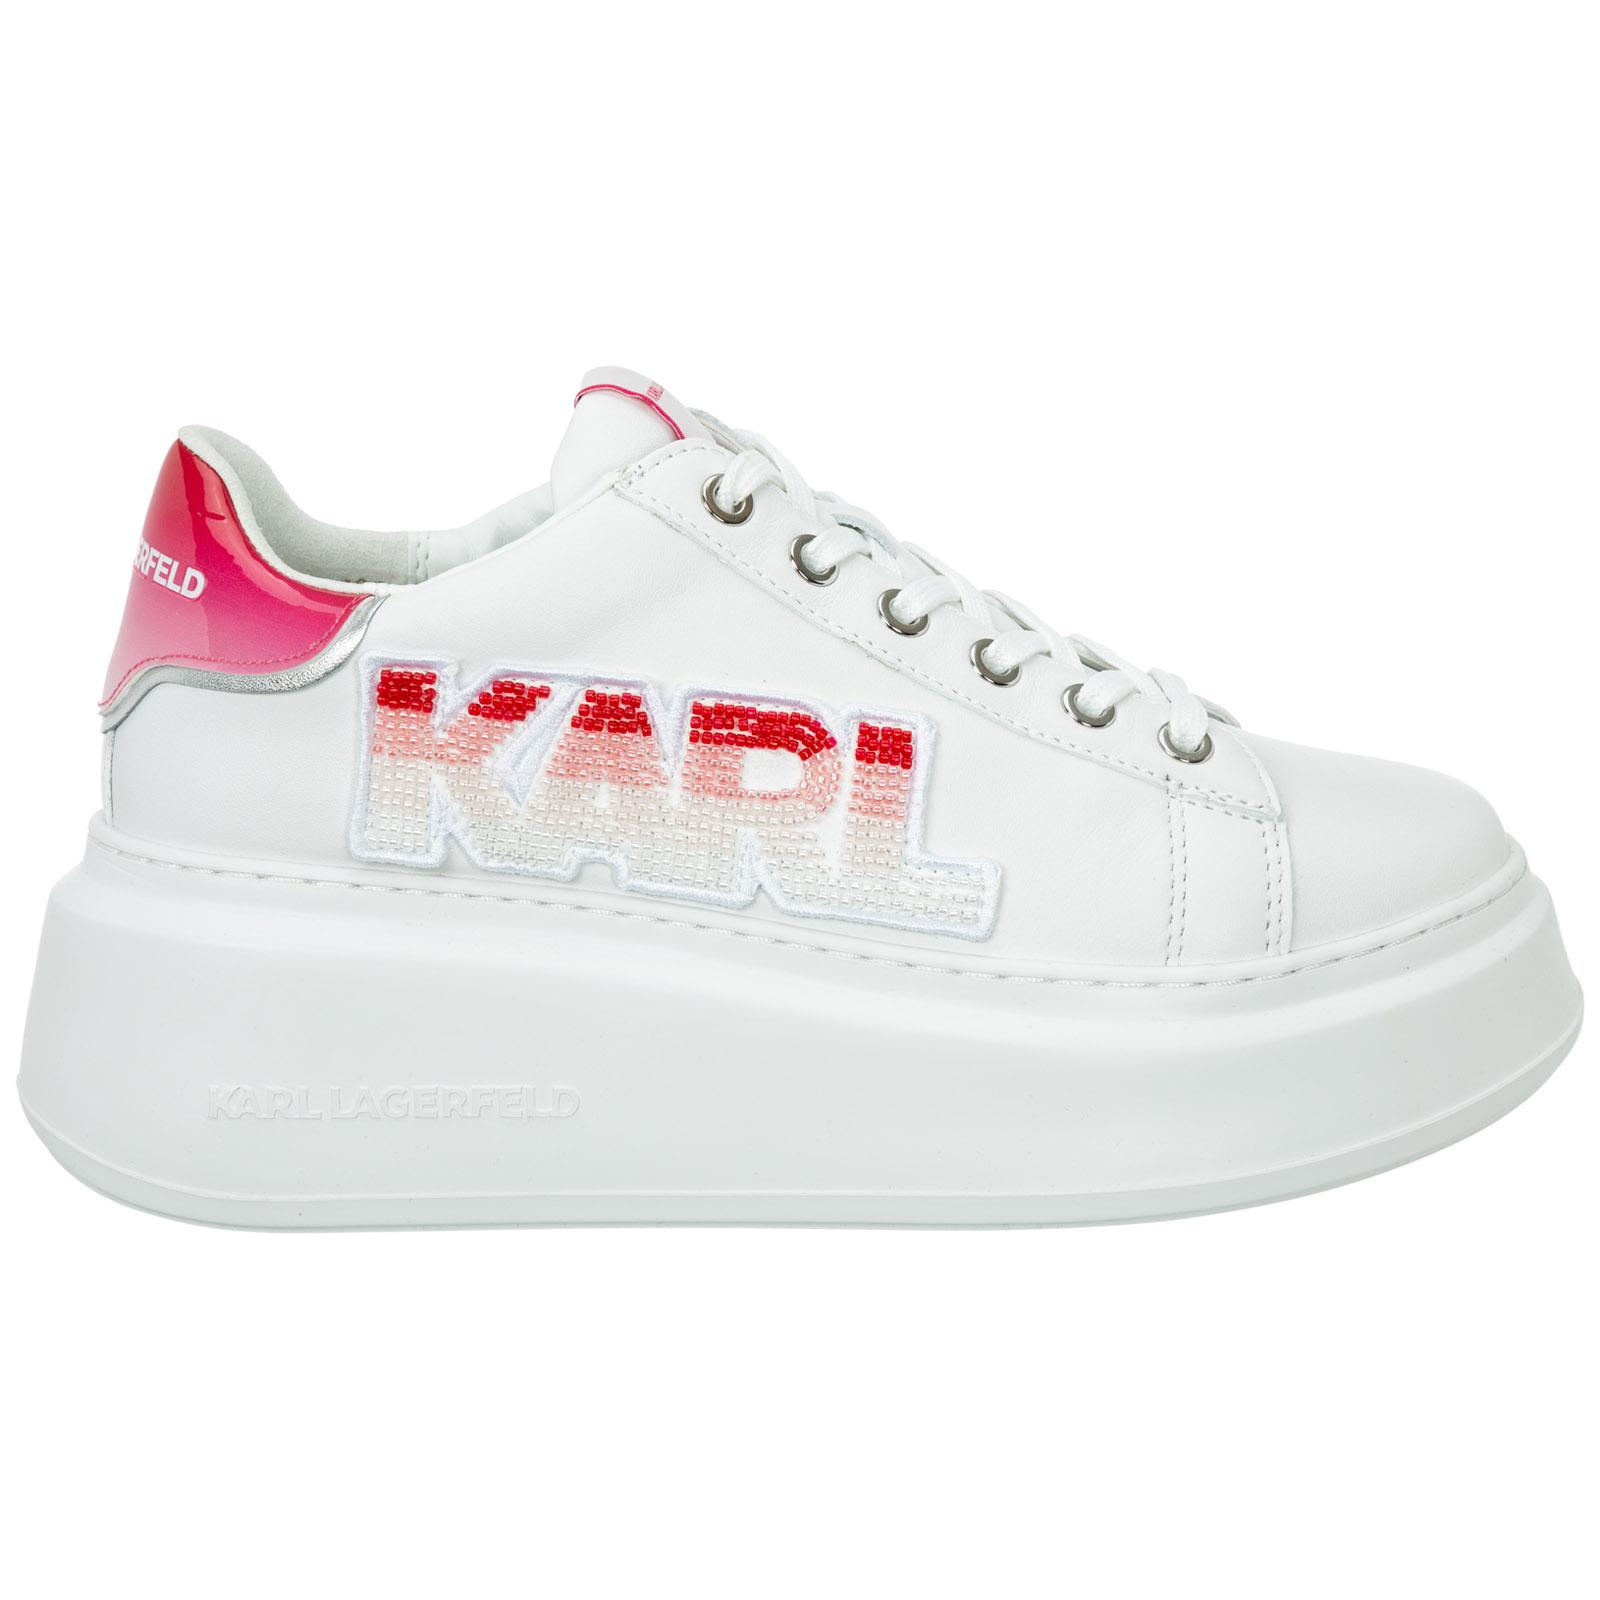 Karl Lagerfeld Shoes Leather Trainers Sneakers Anakapri in White | Lyst